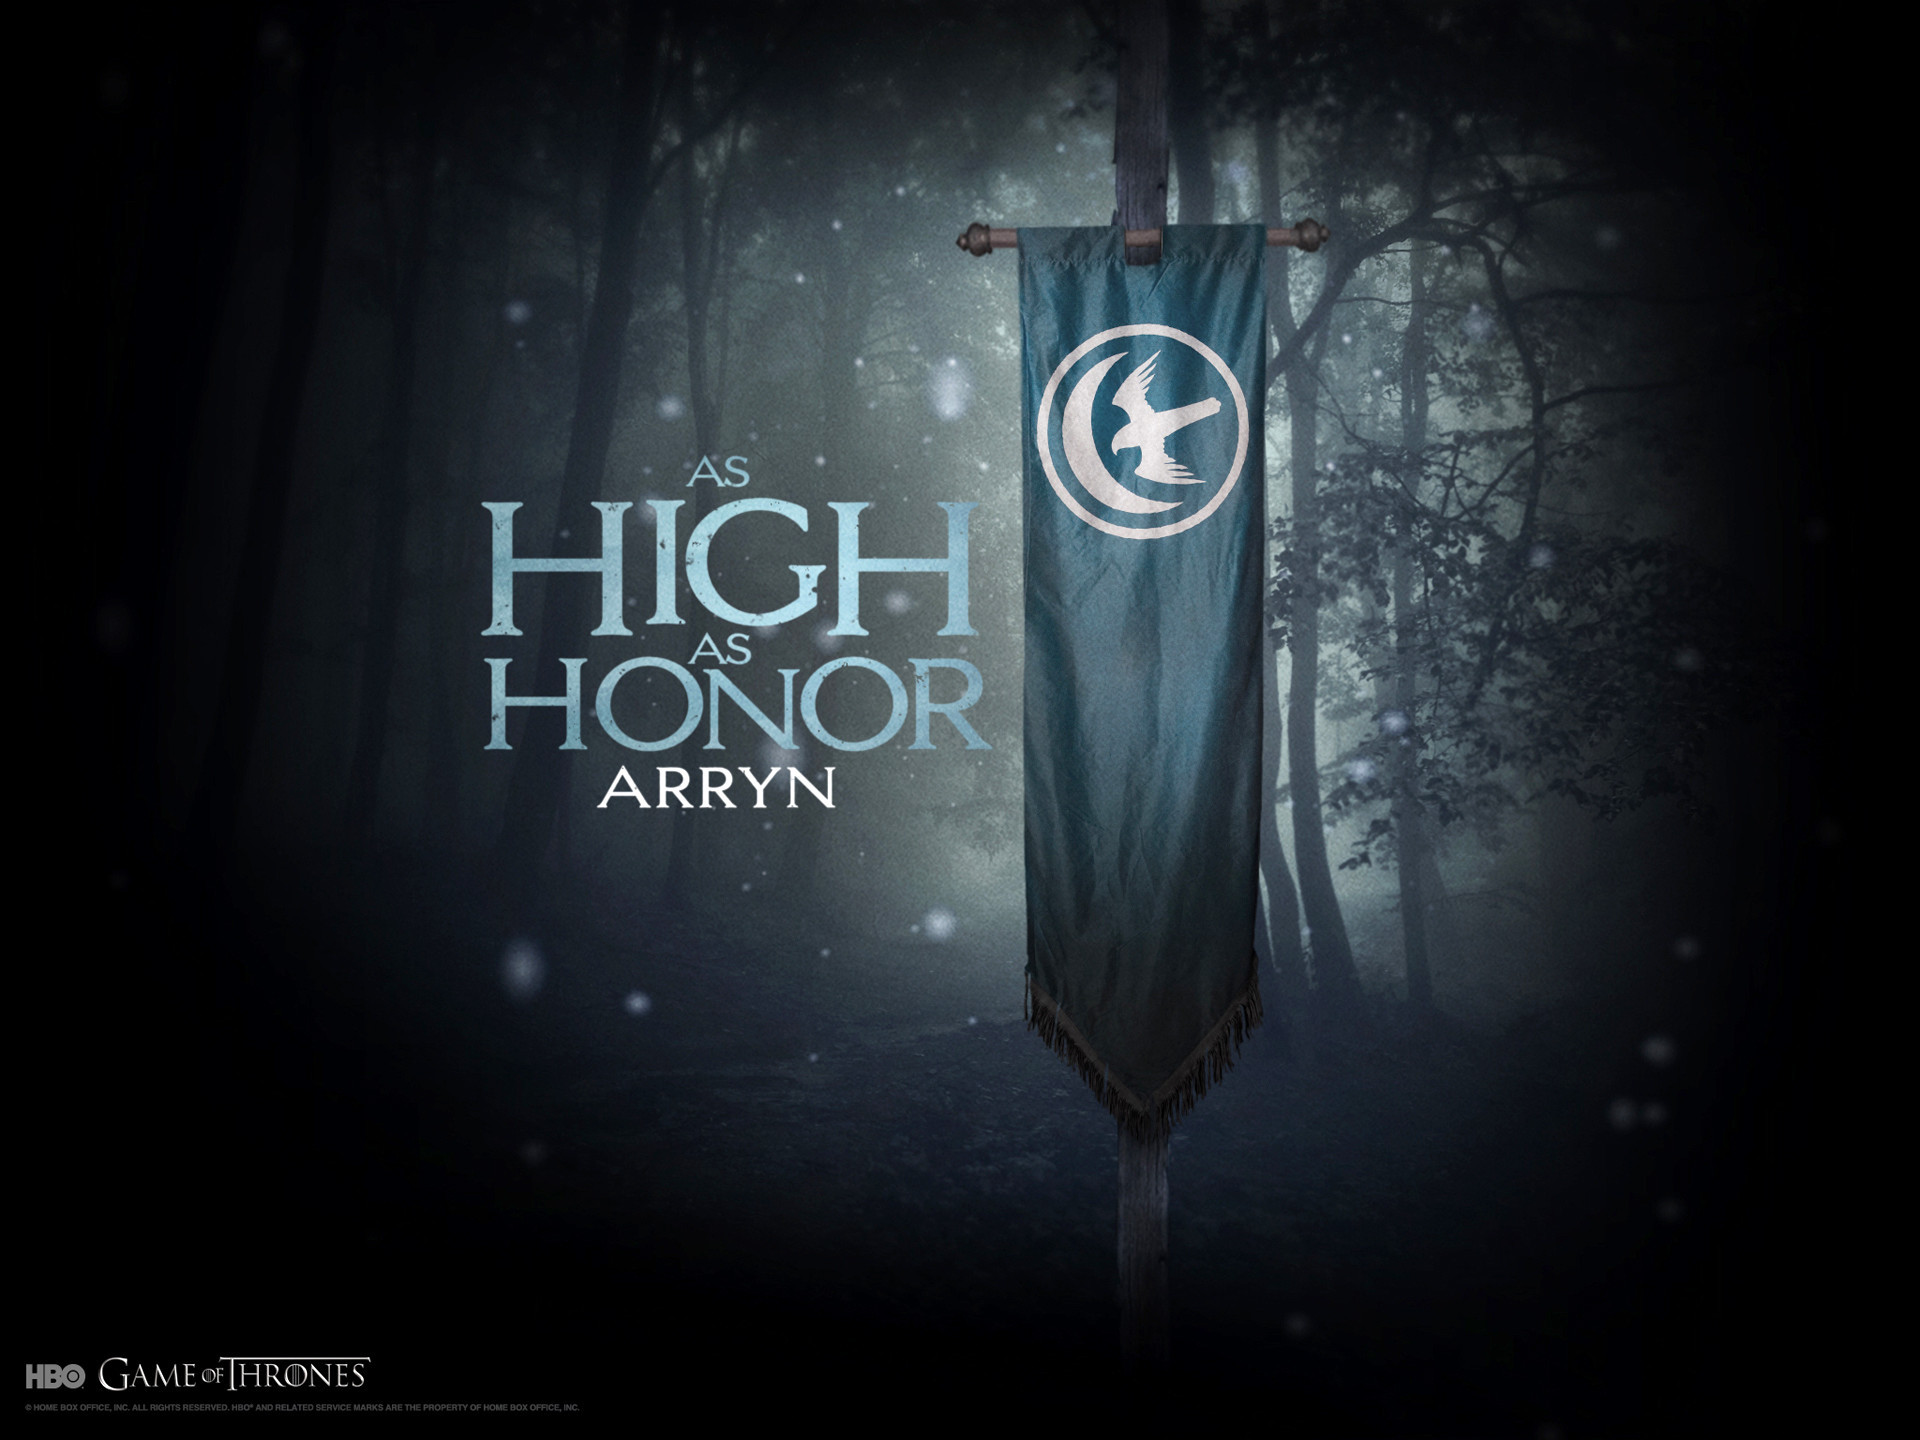 1920x1440  game of thrones images | Game of Thrones House Arryn HD Wallpaper  #1996